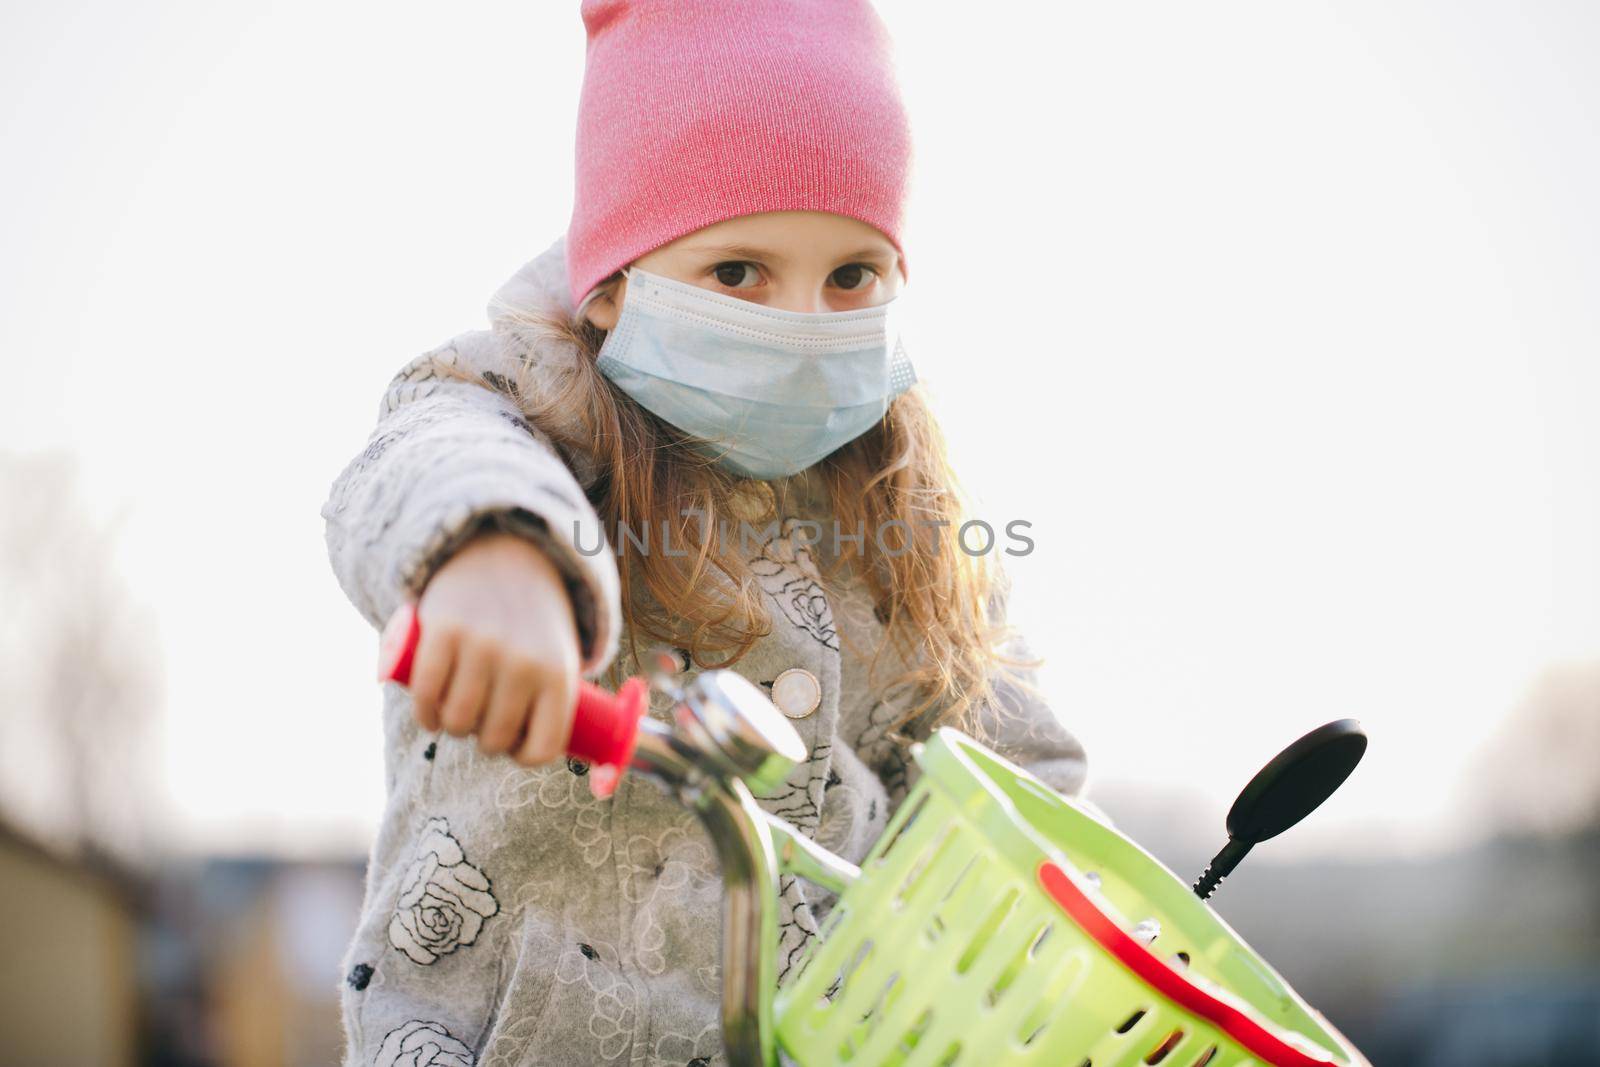 Little Girl Wearing Medical Mask During Coronavirus Epidemic. Sick little girl wearing protection during pandemic. Pretty young Caucasian girl taking on medical mask outdoor.